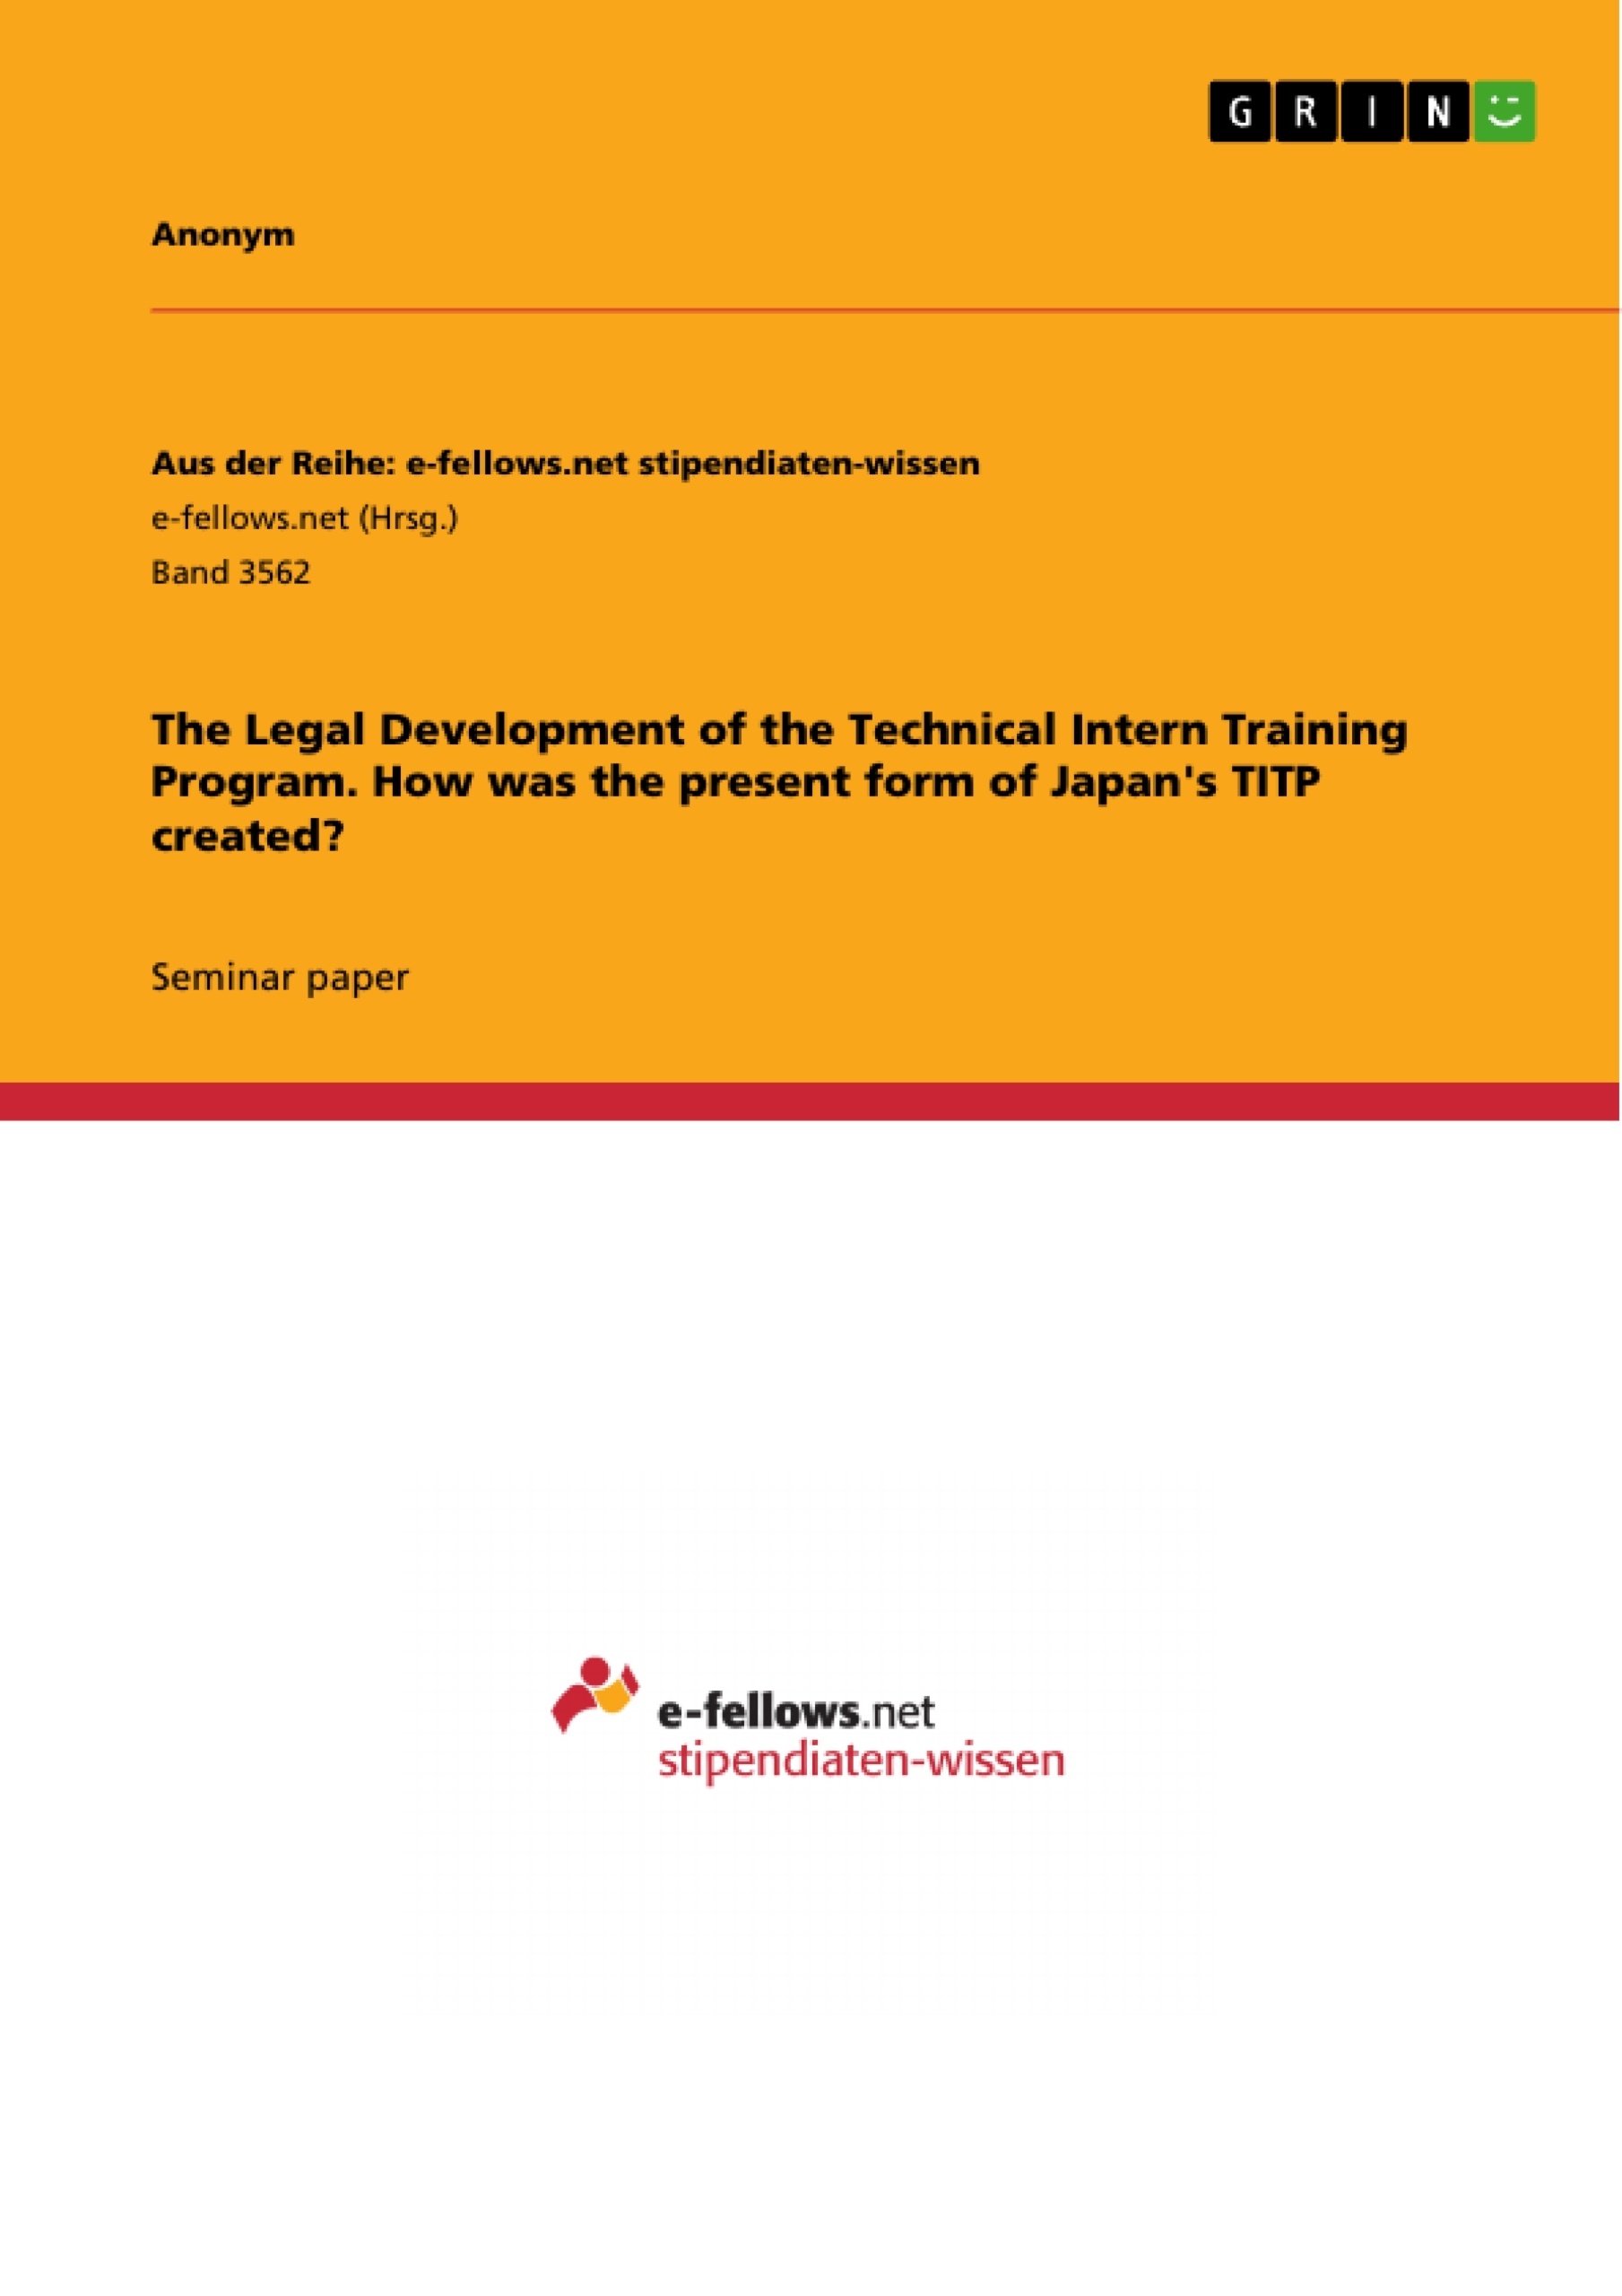 Title: The Legal Development of the Technical Intern Training Program. How was the present form of Japan's TITP created?